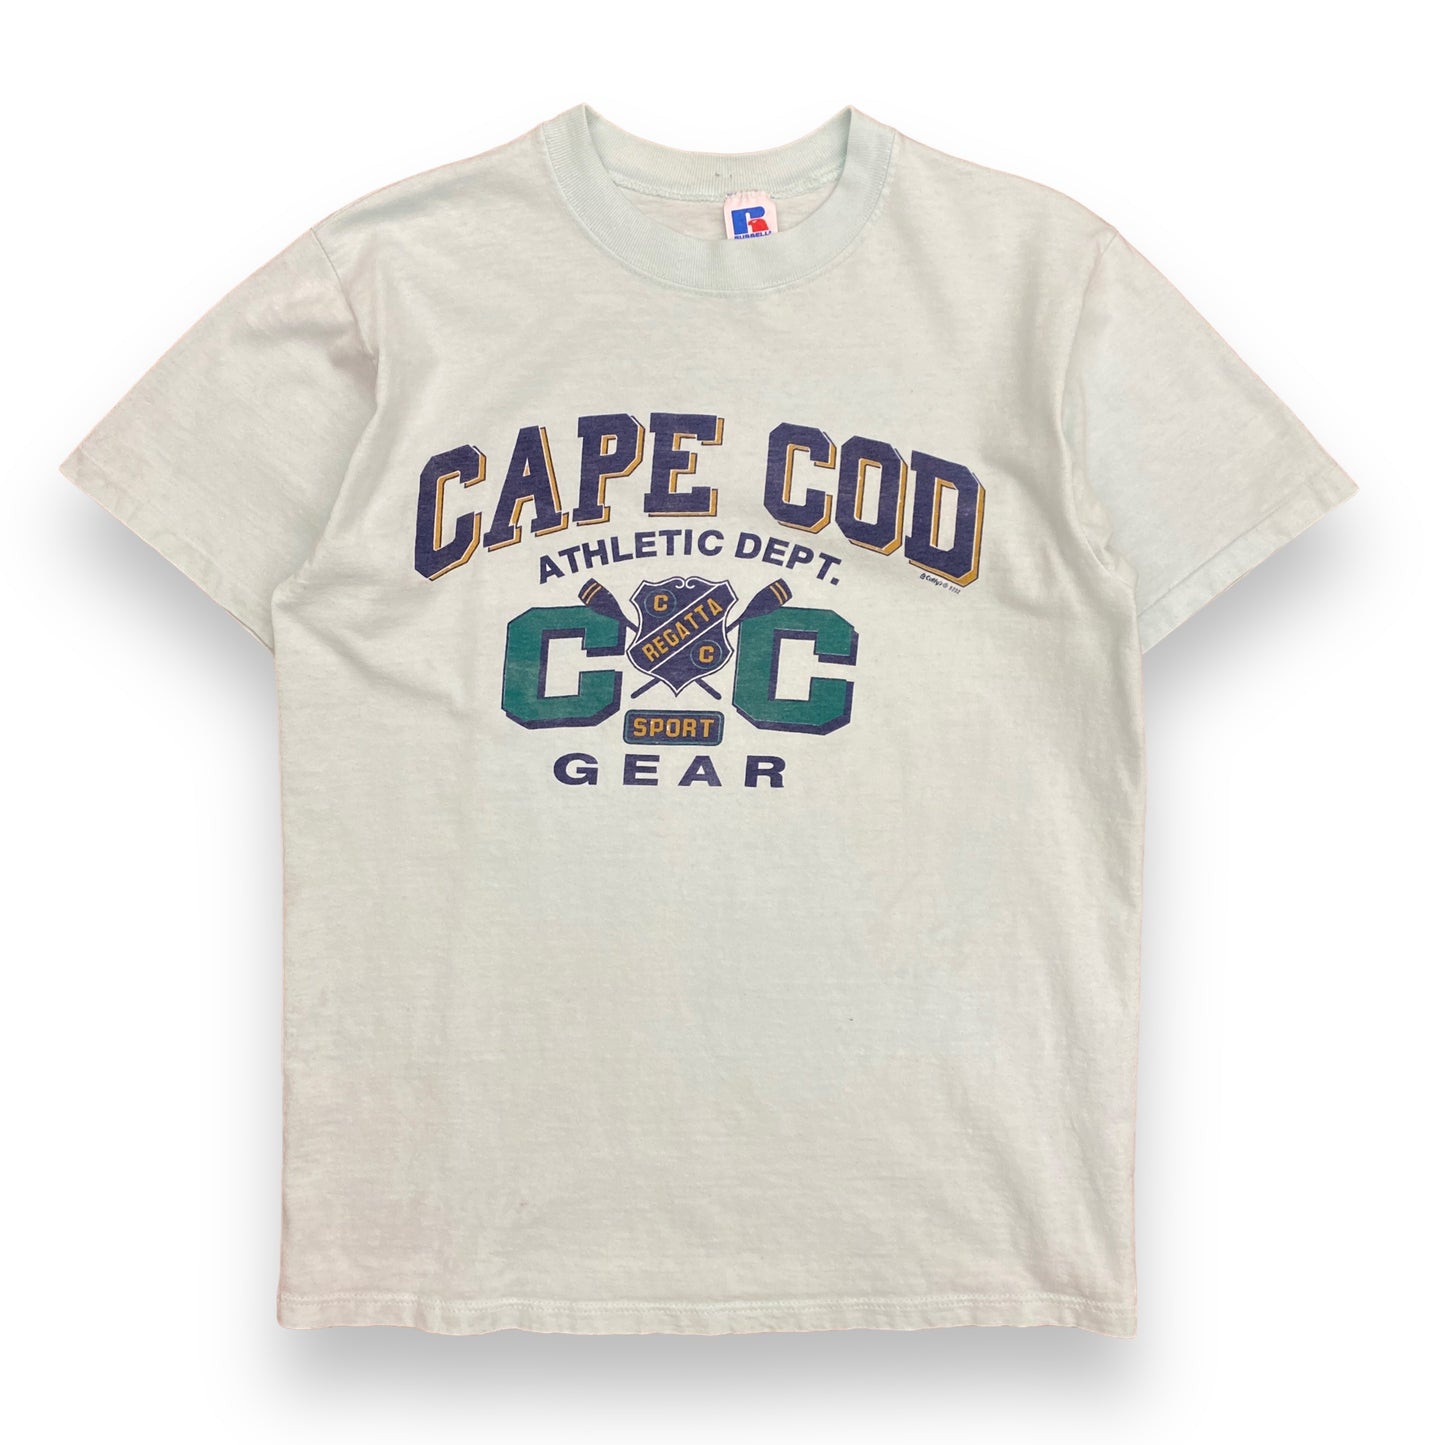 90s Russell "Cape Cod Athletic Dept." Tee - Size Medium